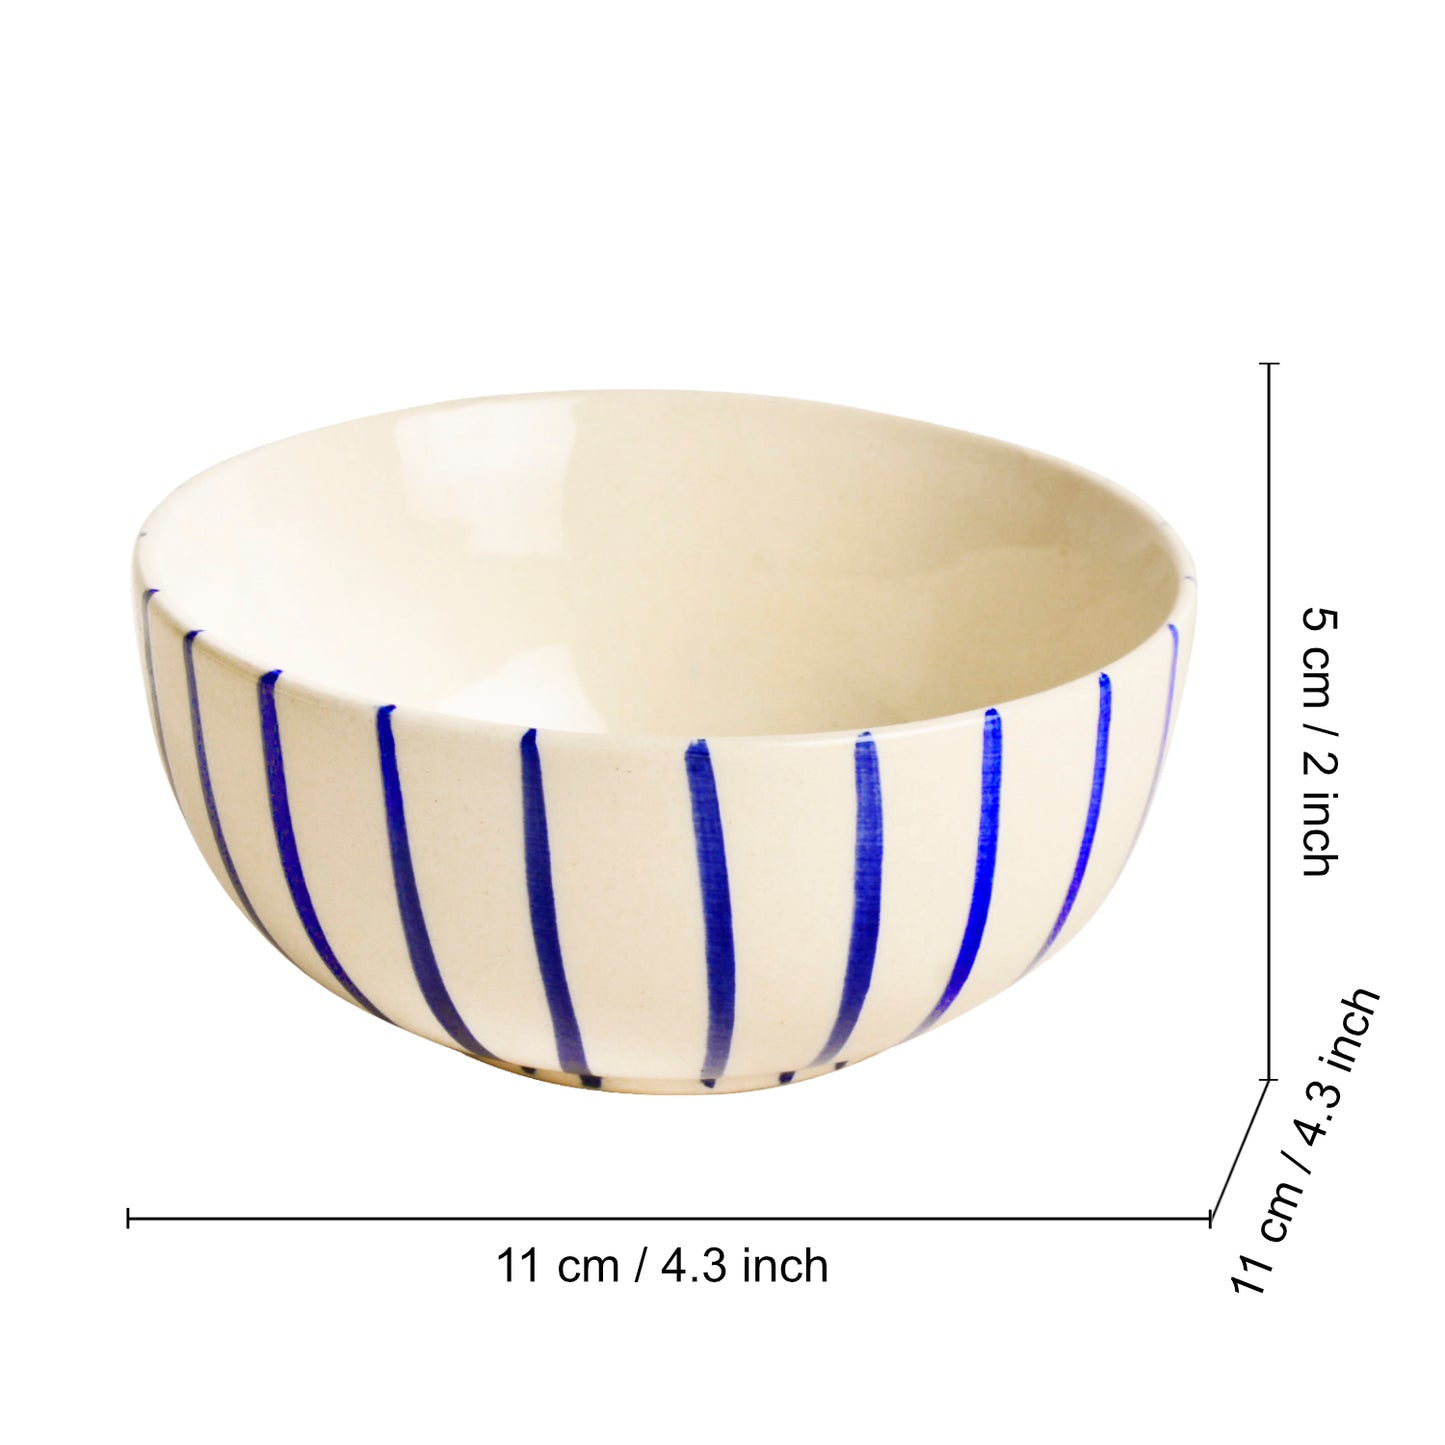 “Blue Kasa Line” Ceramic Striped Dinner Bowls (Set of 4, White and Blue, Diameter – 4 inches)